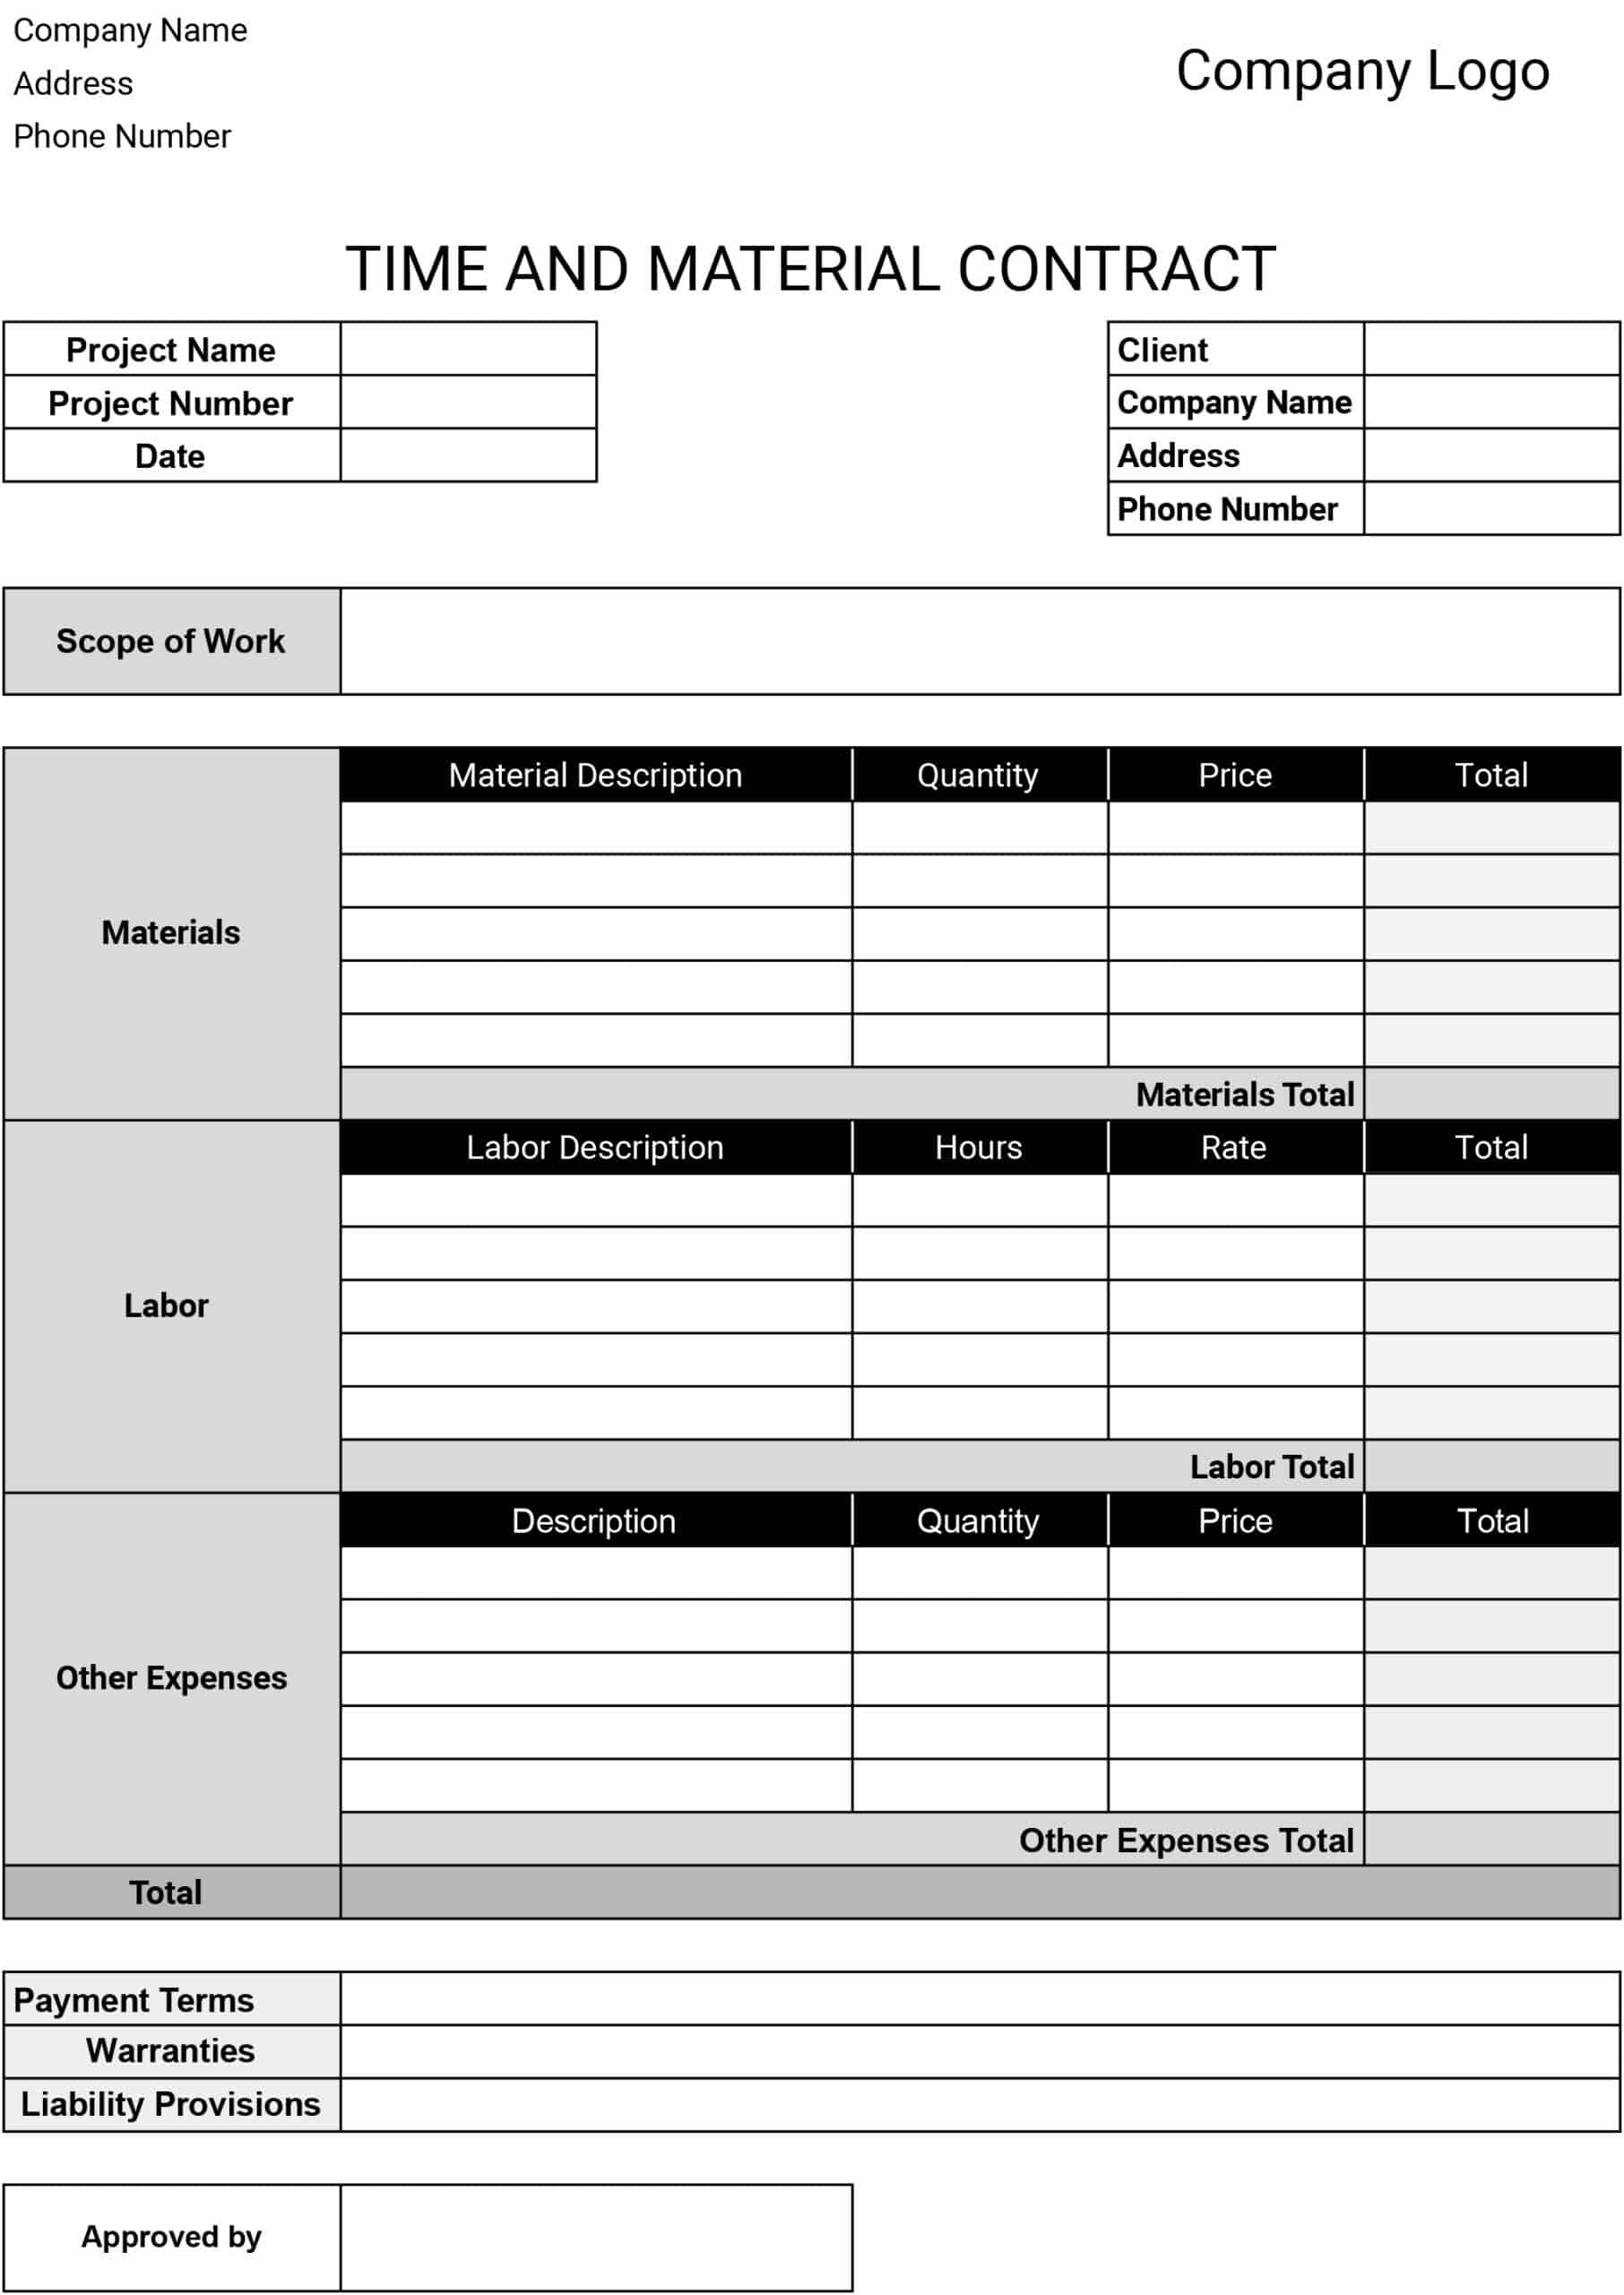 Time and Material Contract Template